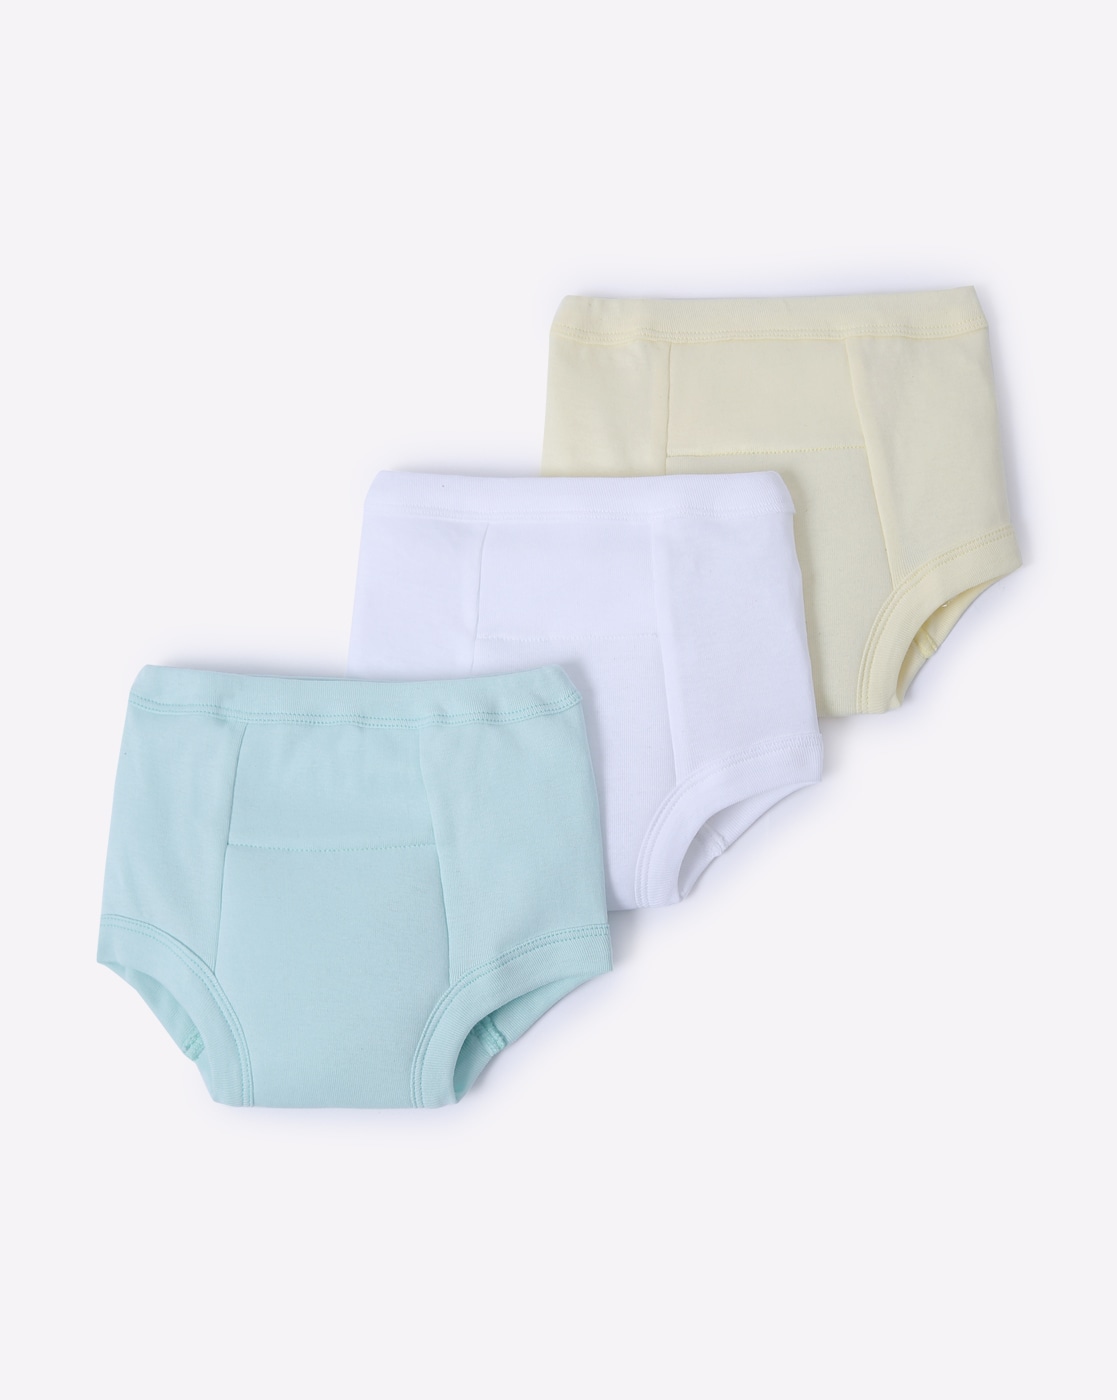 We recommend our Organic Cotton Training pants XKKO Organic - Summer Meadow  - the goods are in stock. www.xkko.eu